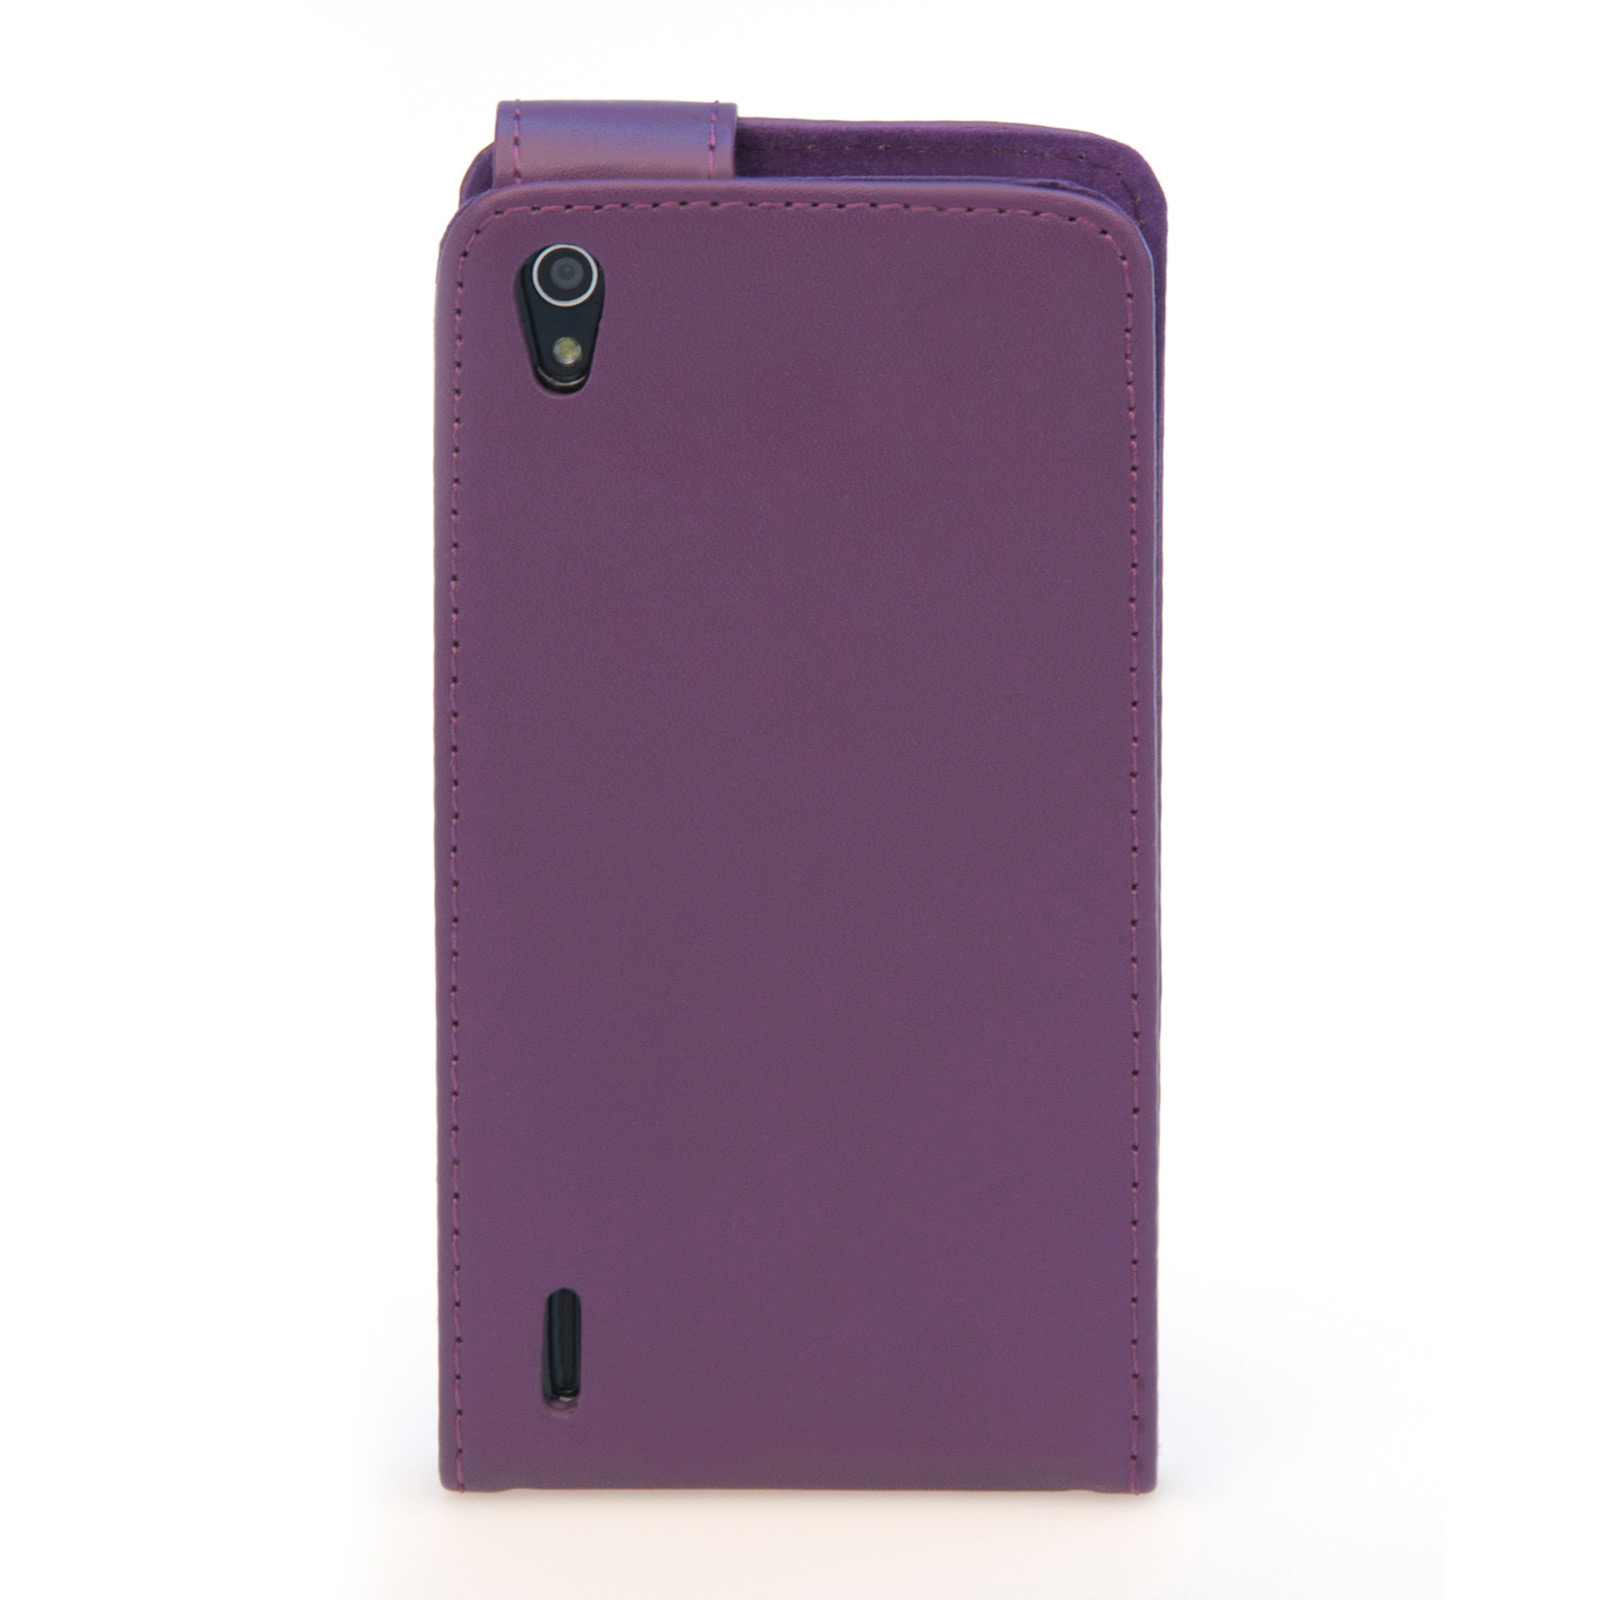 YouSave Accessories Huawei Ascend P7 Leather-Effect Flip Case - Purple